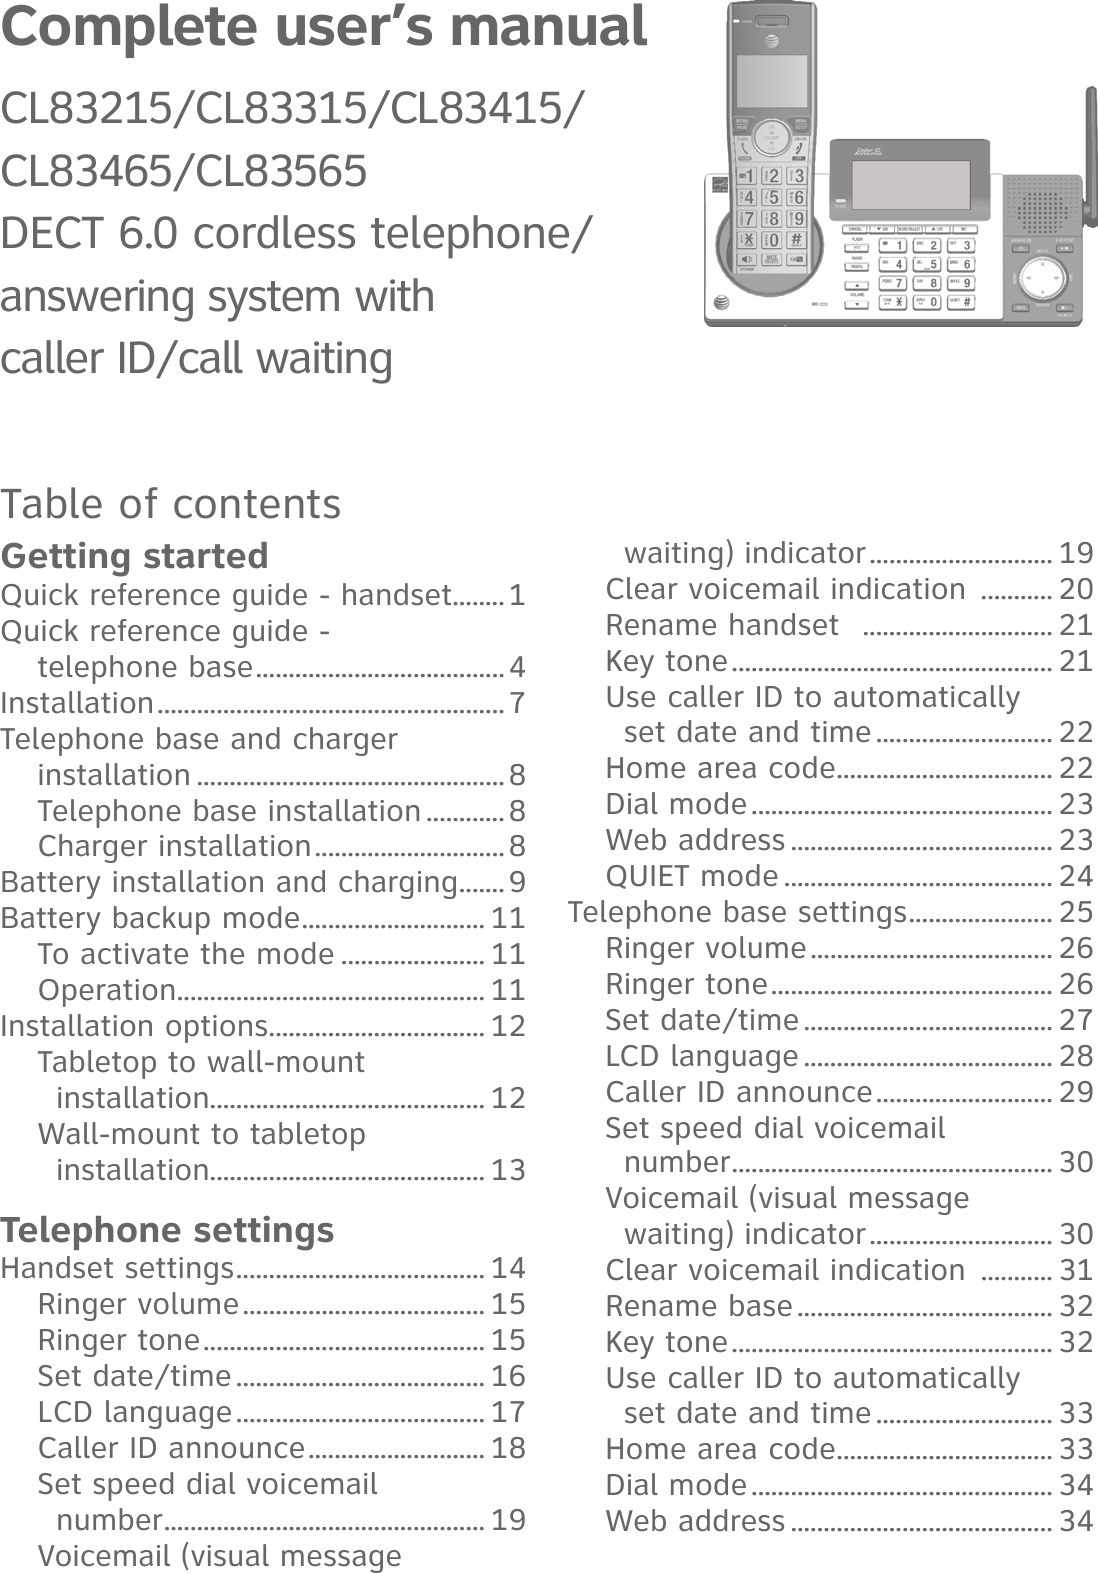 Complete user’s manual CL83215/CL83315/CL83415/CL83465/CL83565 DECT 6.0 cordless telephone/ answering system with  caller ID/call waitingTable of contentsGetting startedQuick reference guide - handset ........1Quick reference guide -  telephone base ......................................4Installation .....................................................7Telephone base and charger  installation ...............................................8Telephone base installation ............8Charger installation .............................8Battery installation and charging .......9Battery backup mode ............................ 11To activate the mode ...................... 11Operation ............................................... 11Installation options ................................. 12Tabletop to wall-mount  installation.......................................... 12Wall-mount to tabletop  installation.......................................... 13Telephone settingsHandset settings ...................................... 14Ringer volume ..................................... 15Ringer tone ........................................... 15Set date/time ...................................... 16LCD language ...................................... 17Caller ID announce ........................... 18Set speed dial voicemail  number ................................................. 19Voicemail (visual message  waiting) indicator ............................ 19Clear voicemail indication  ........... 20Rename handset   ............................. 21Key tone ................................................. 21Use caller ID to automatically  set date and time ........................... 22Home area code ................................. 22Dial mode .............................................. 23Web address ........................................ 23QUIET mode ......................................... 24Telephone base settings ...................... 25Ringer volume ..................................... 26Ringer tone ........................................... 26Set date/time ...................................... 27LCD language ...................................... 28Caller ID announce ........................... 29Set speed dial voicemail  number ................................................. 30Voicemail (visual message  waiting) indicator ............................ 30Clear voicemail indication  ........... 31Rename base ....................................... 32Key tone ................................................. 32Use caller ID to automatically  set date and time ........................... 33Home area code ................................. 33Dial mode .............................................. 34Web address ........................................ 34